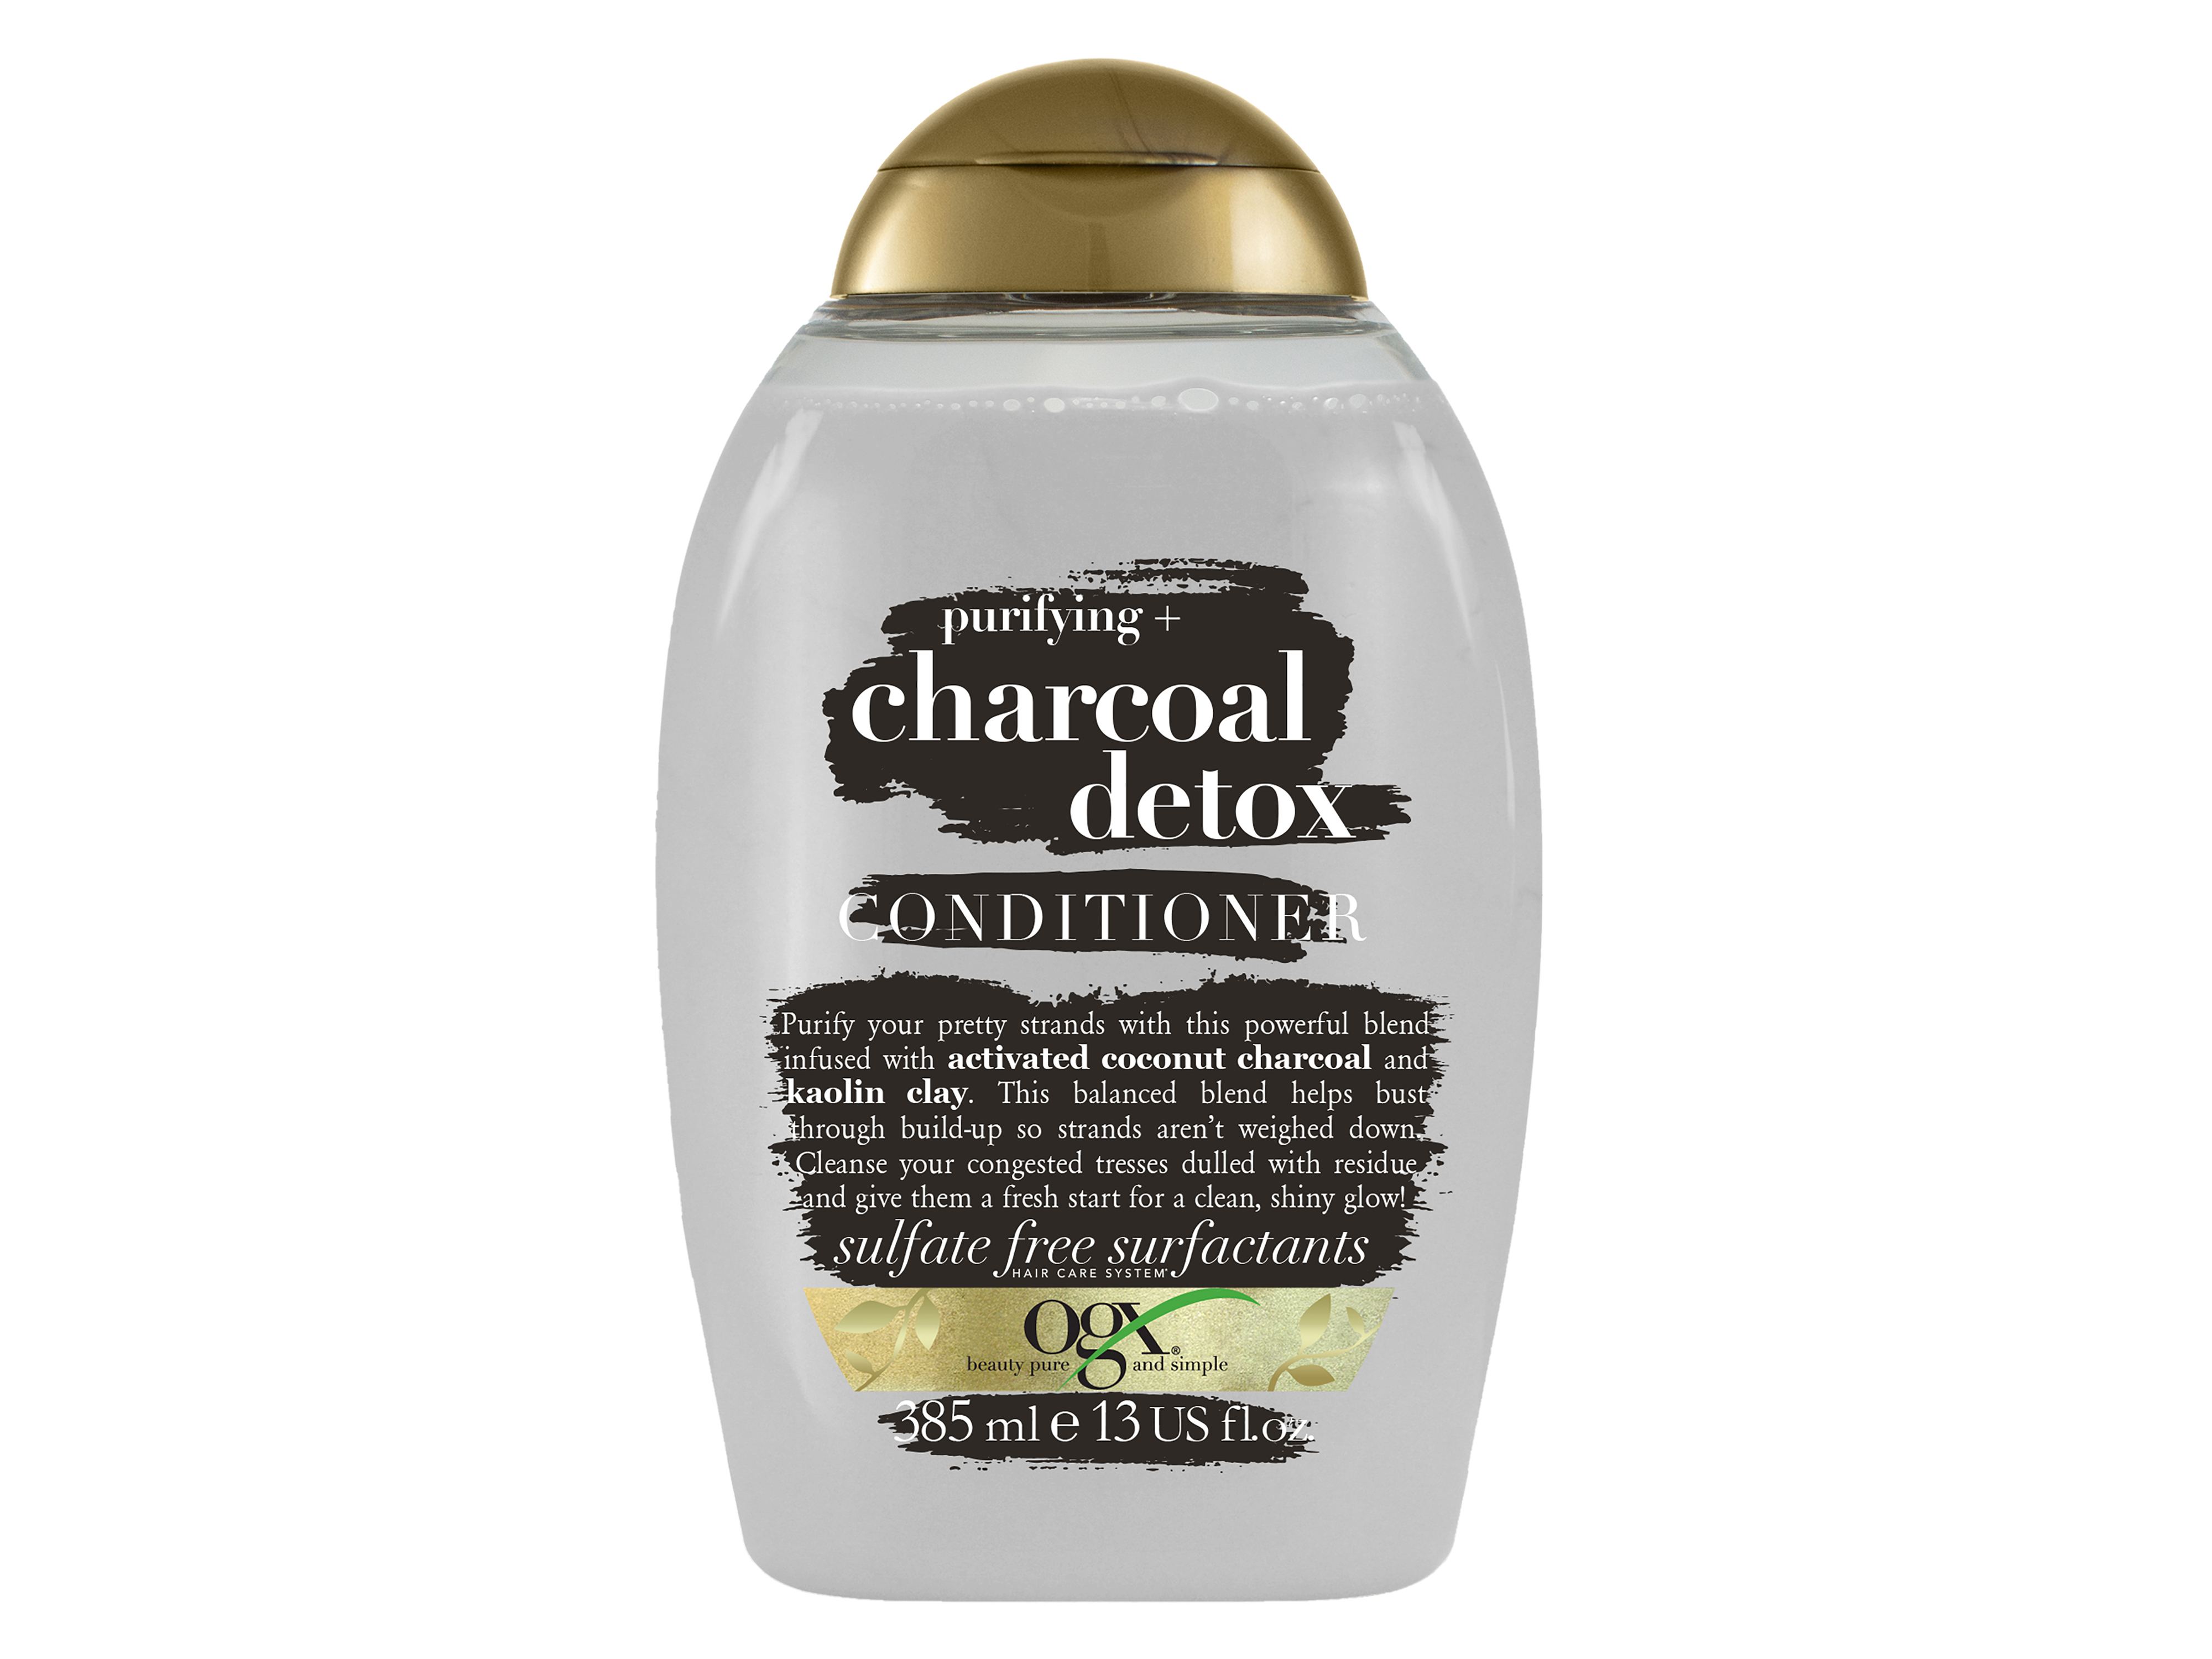 Ogx Purifying+ Charcoal Detox Conditione, 385 ml